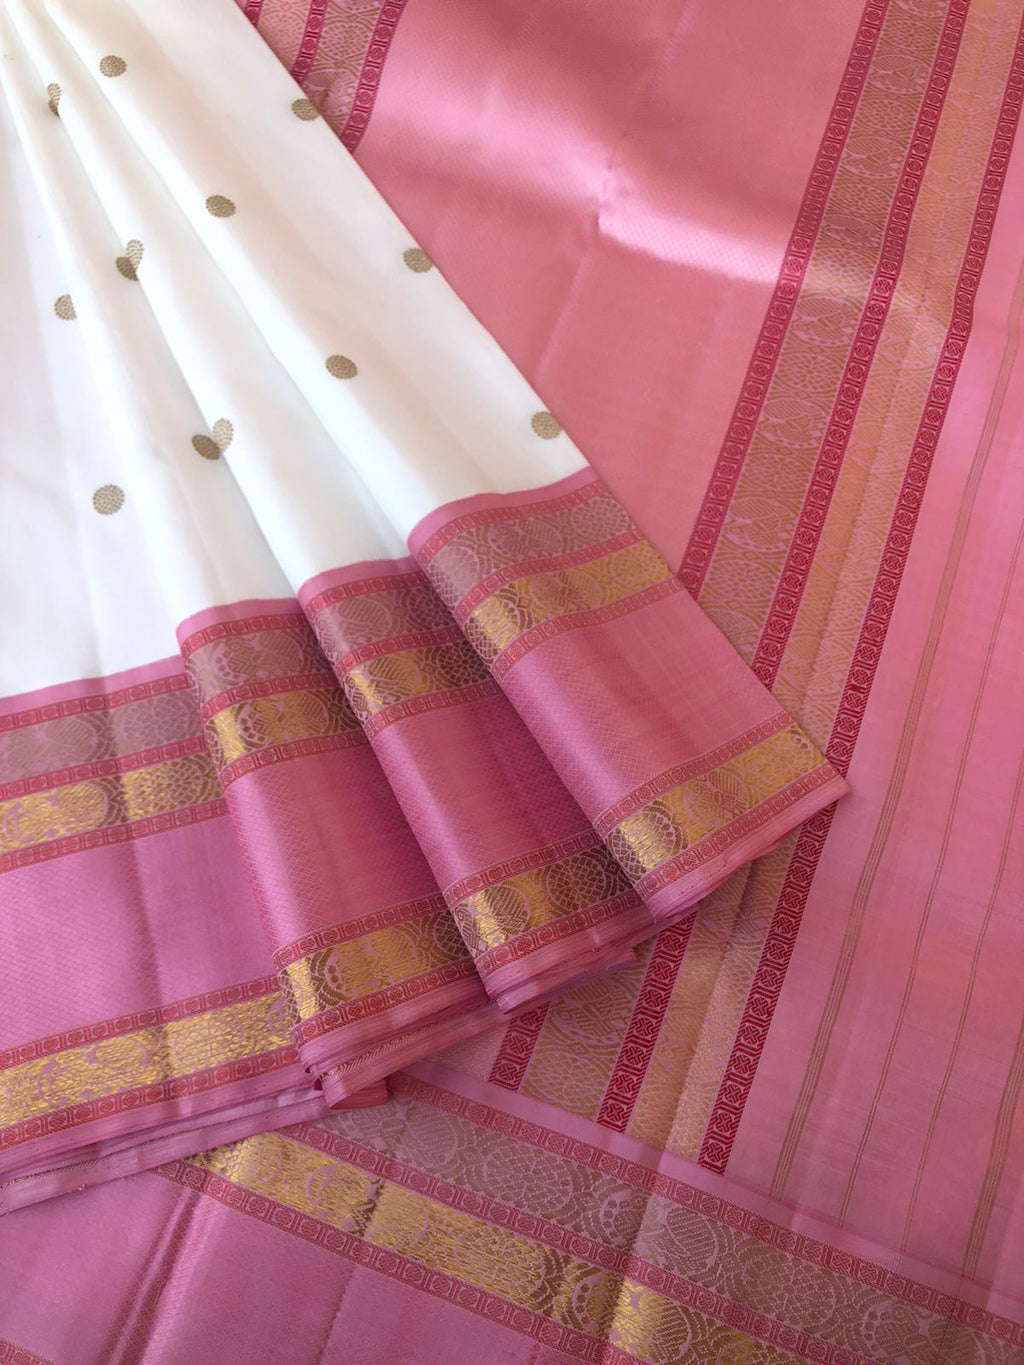 Meenakshi Kalayanam - Authentic Korvai Kanchivarams - the stunning off white and onion pink and the best part is about the Lakshadeepam blouse